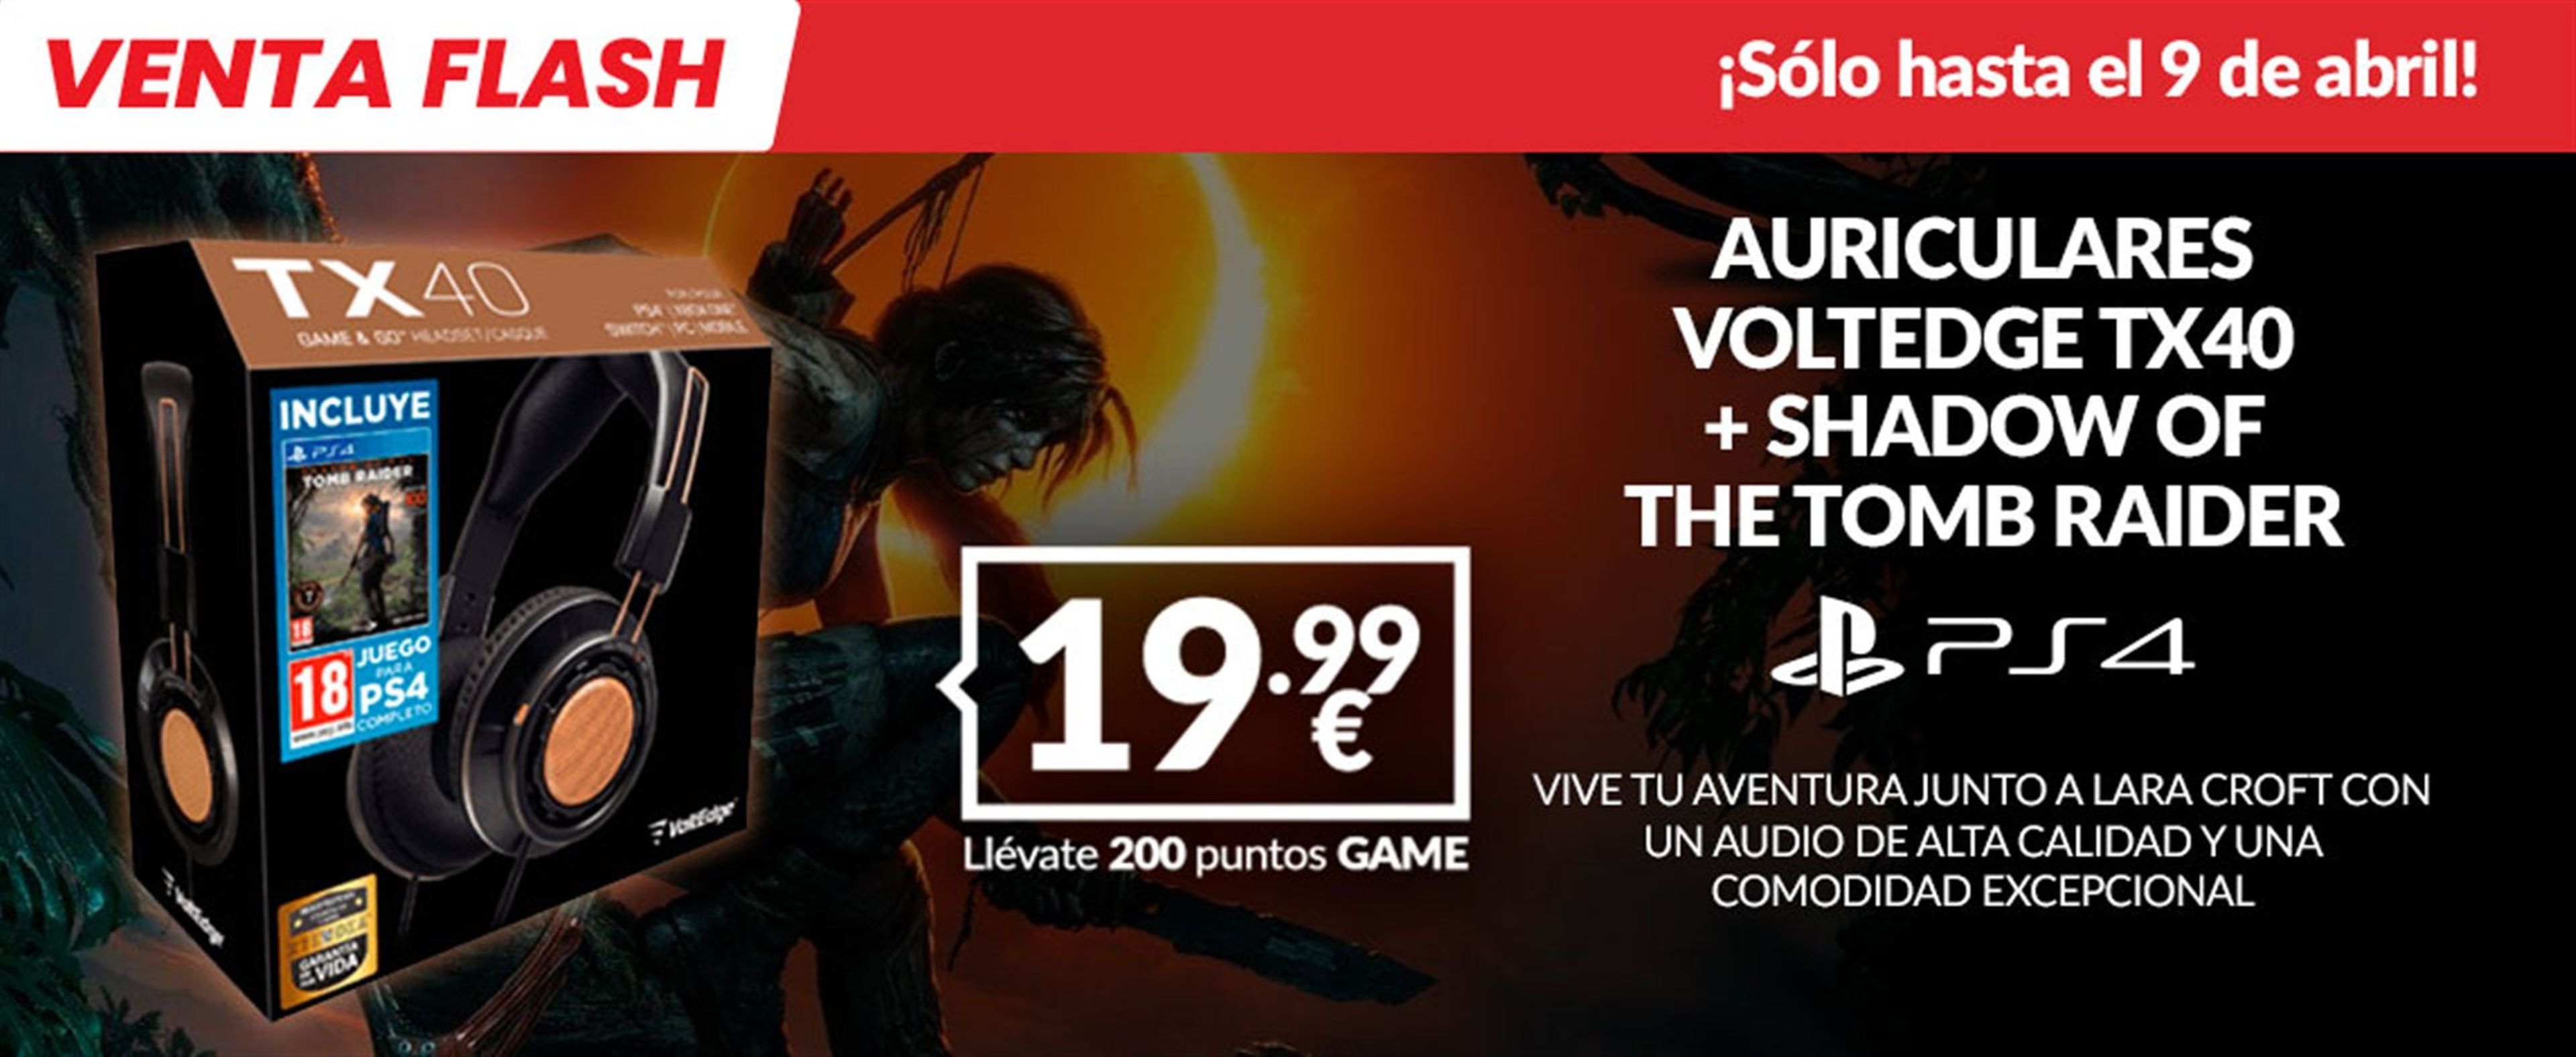 Pack de auriculares Voltedge TX40 + Shadow of the Tomb Raider en GAME